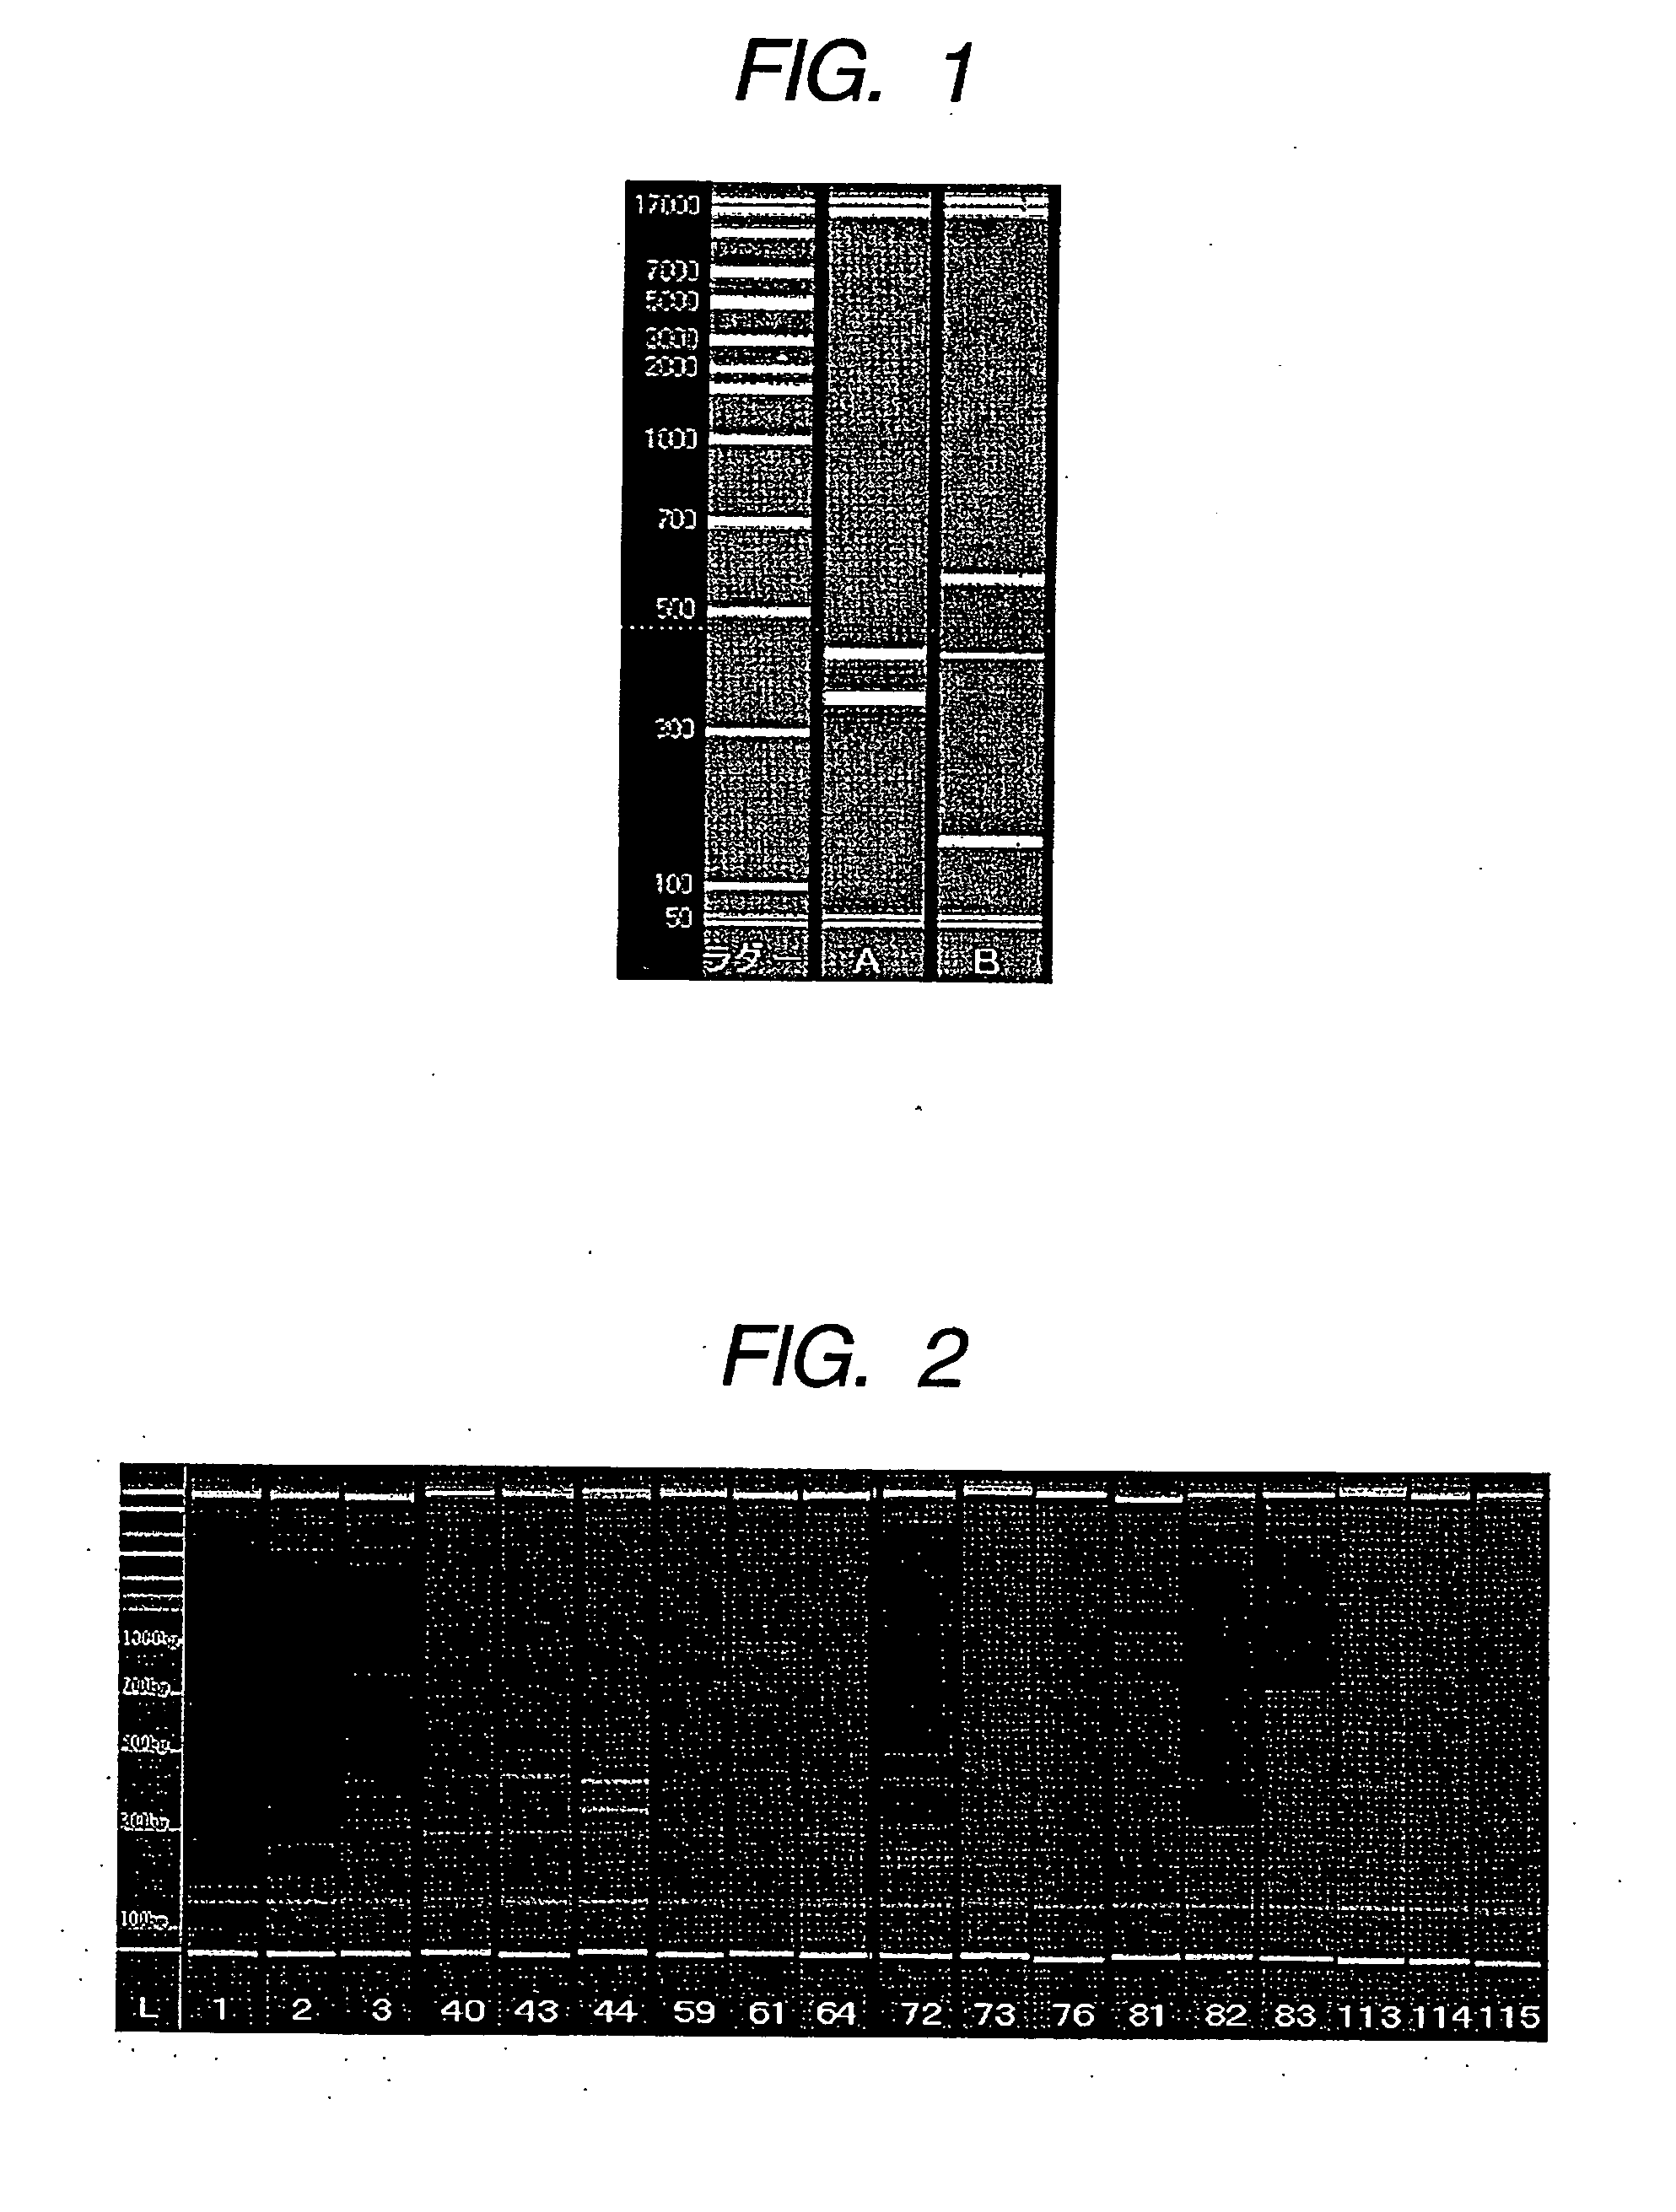 Probe, probe set and information acquisition method using the same